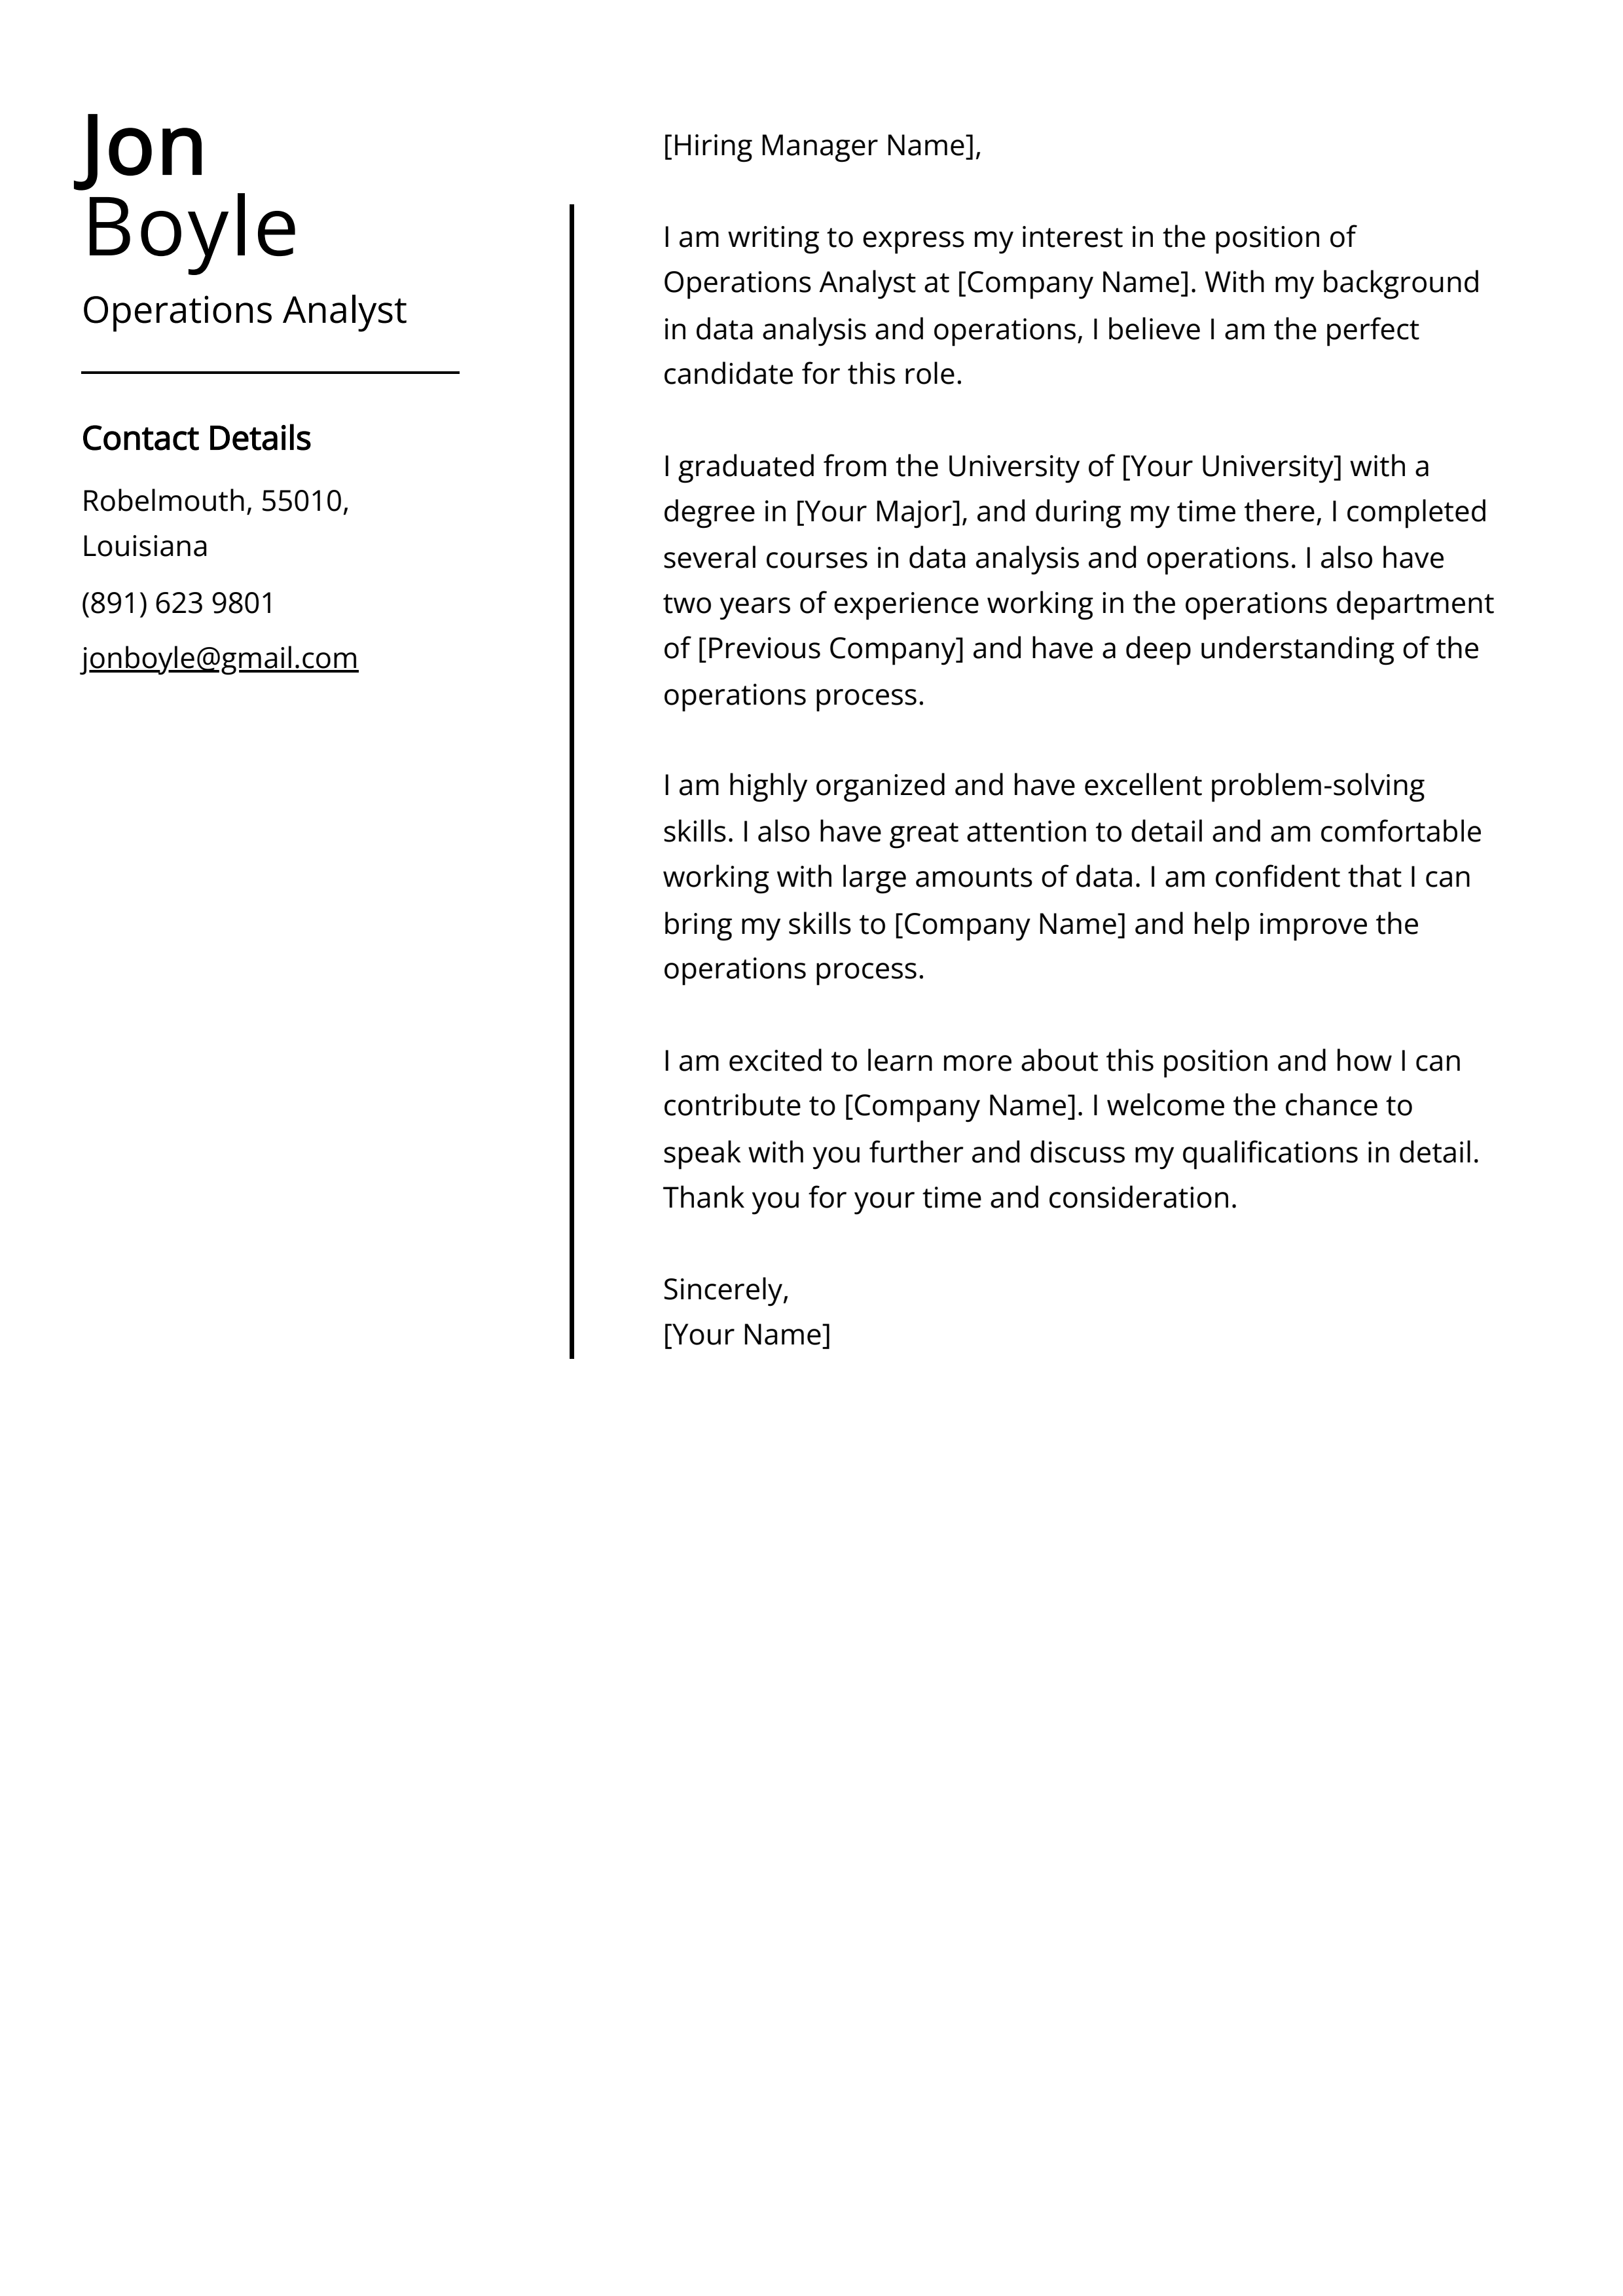 Operations Analyst Cover Letter Example